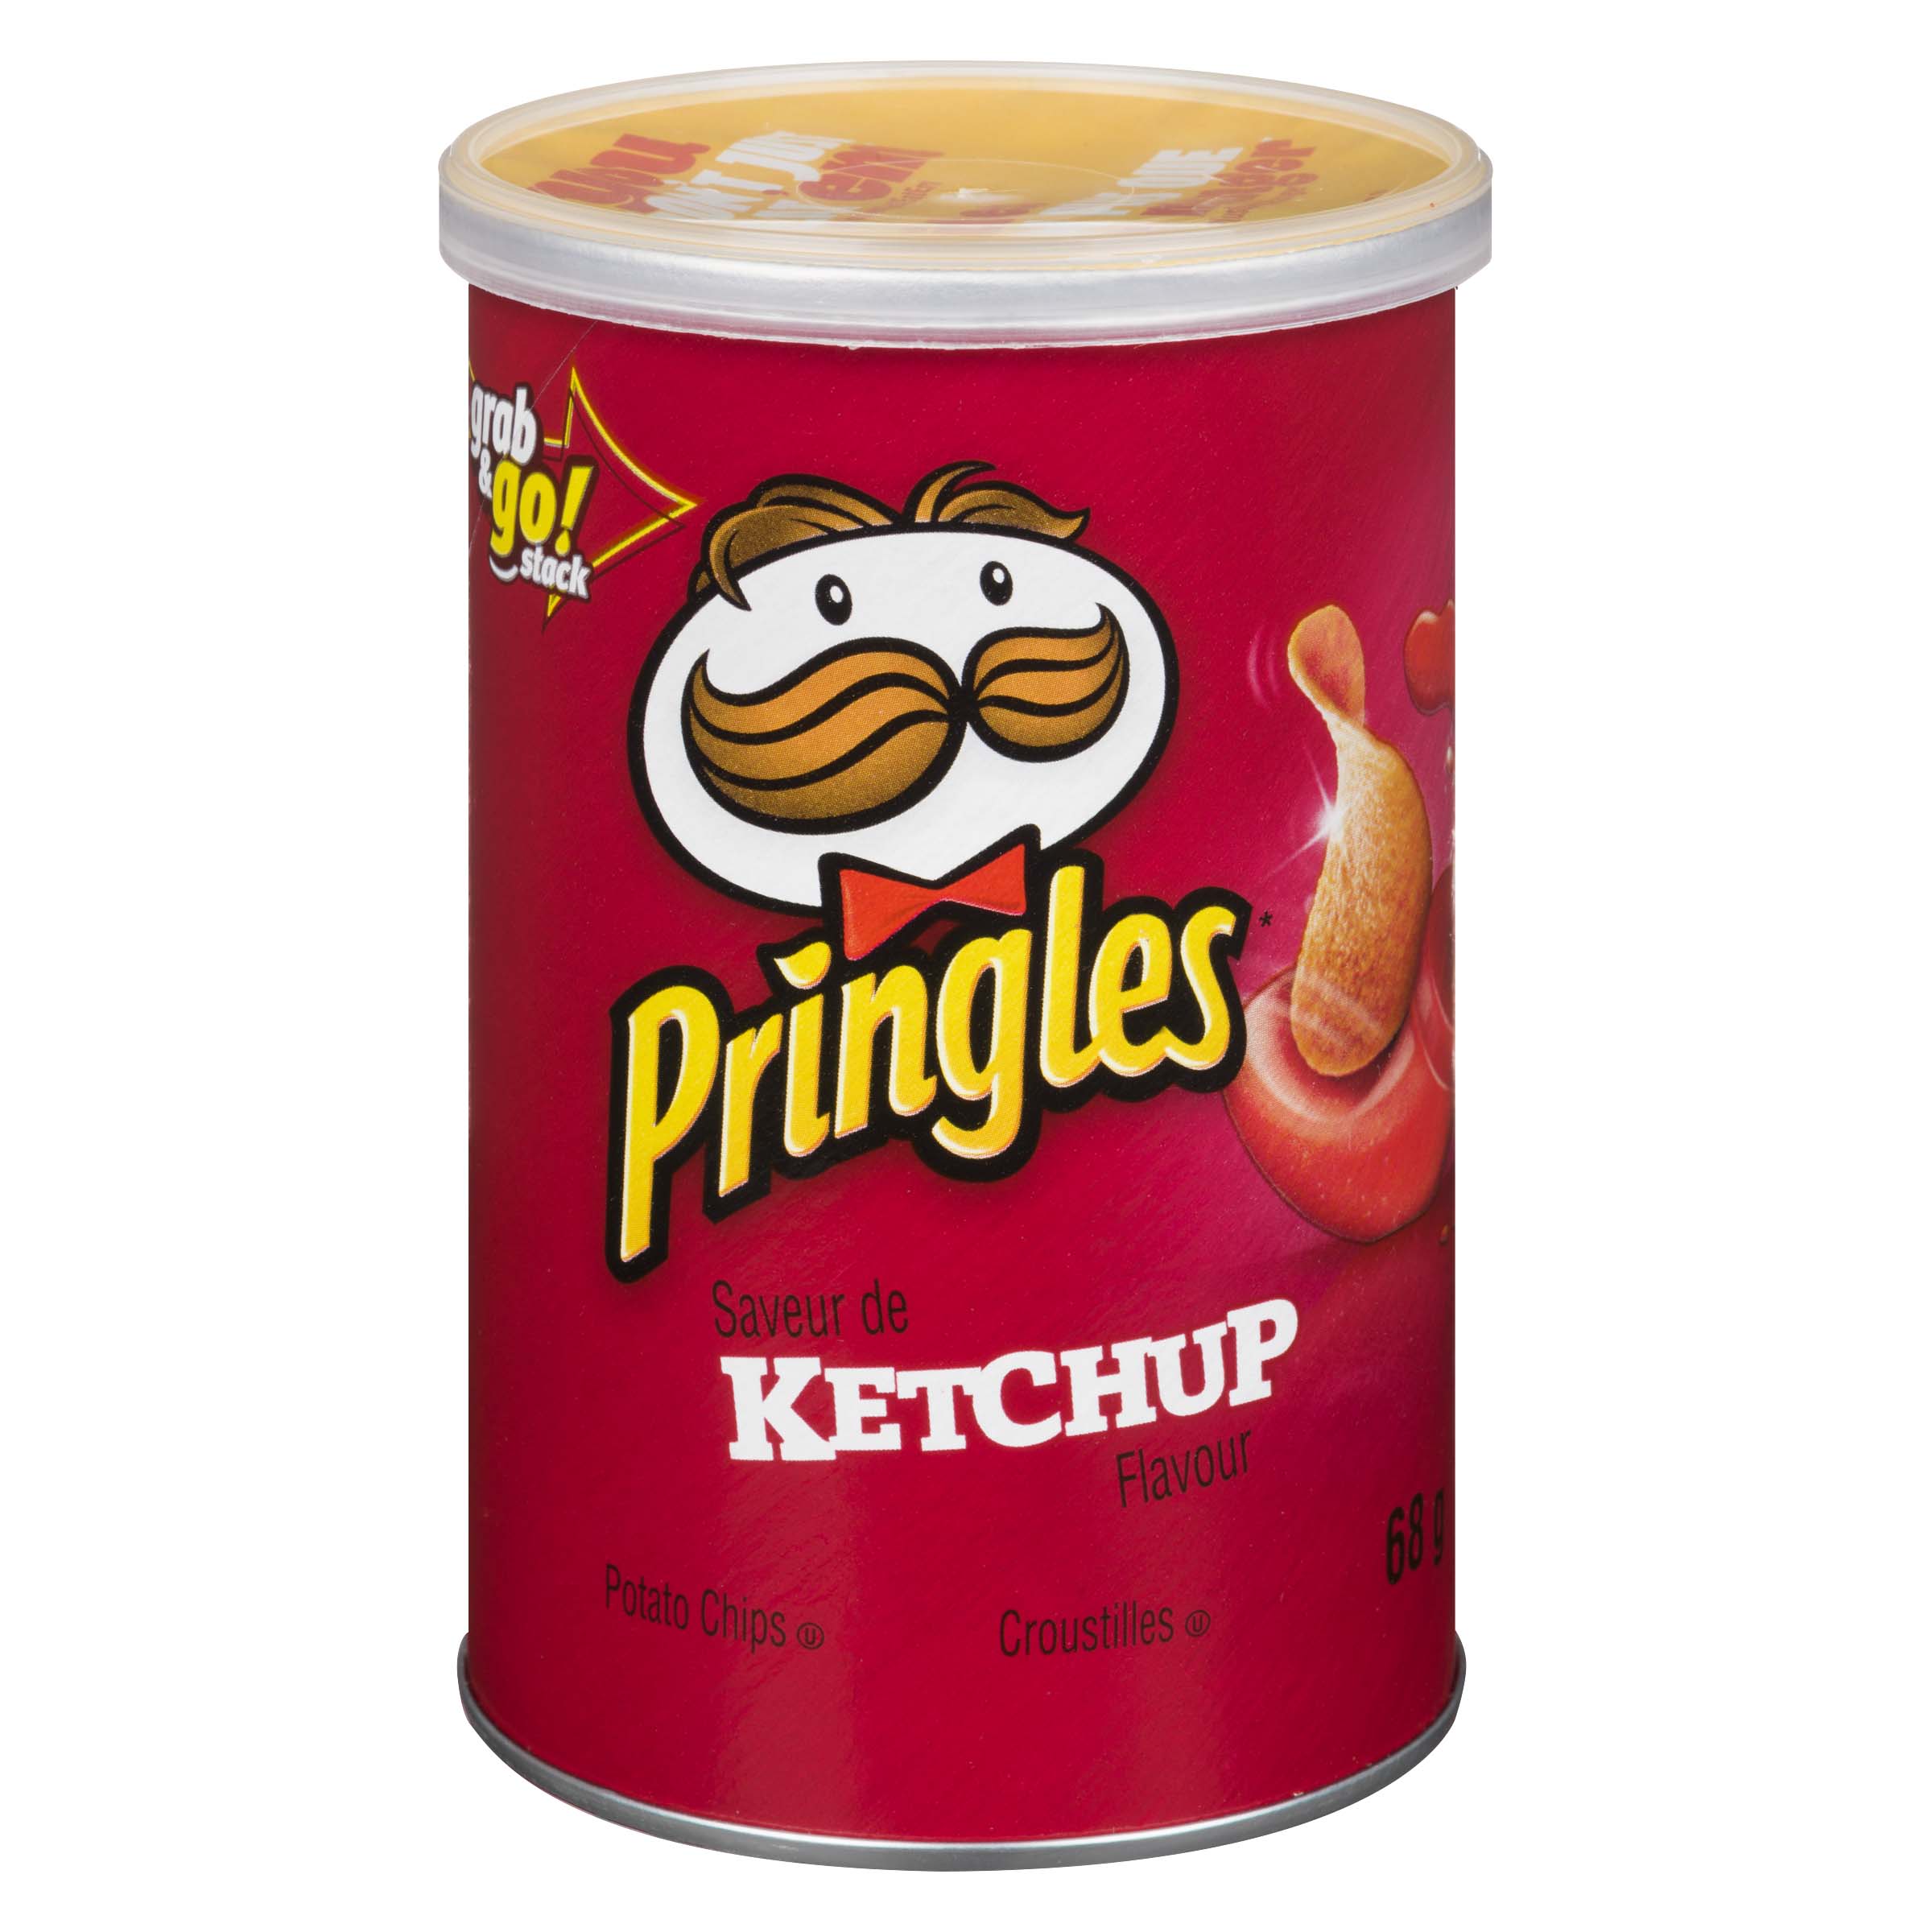 Pringles Potato Chips Ketchup Flavour 68 g | Powell's Supermarkets